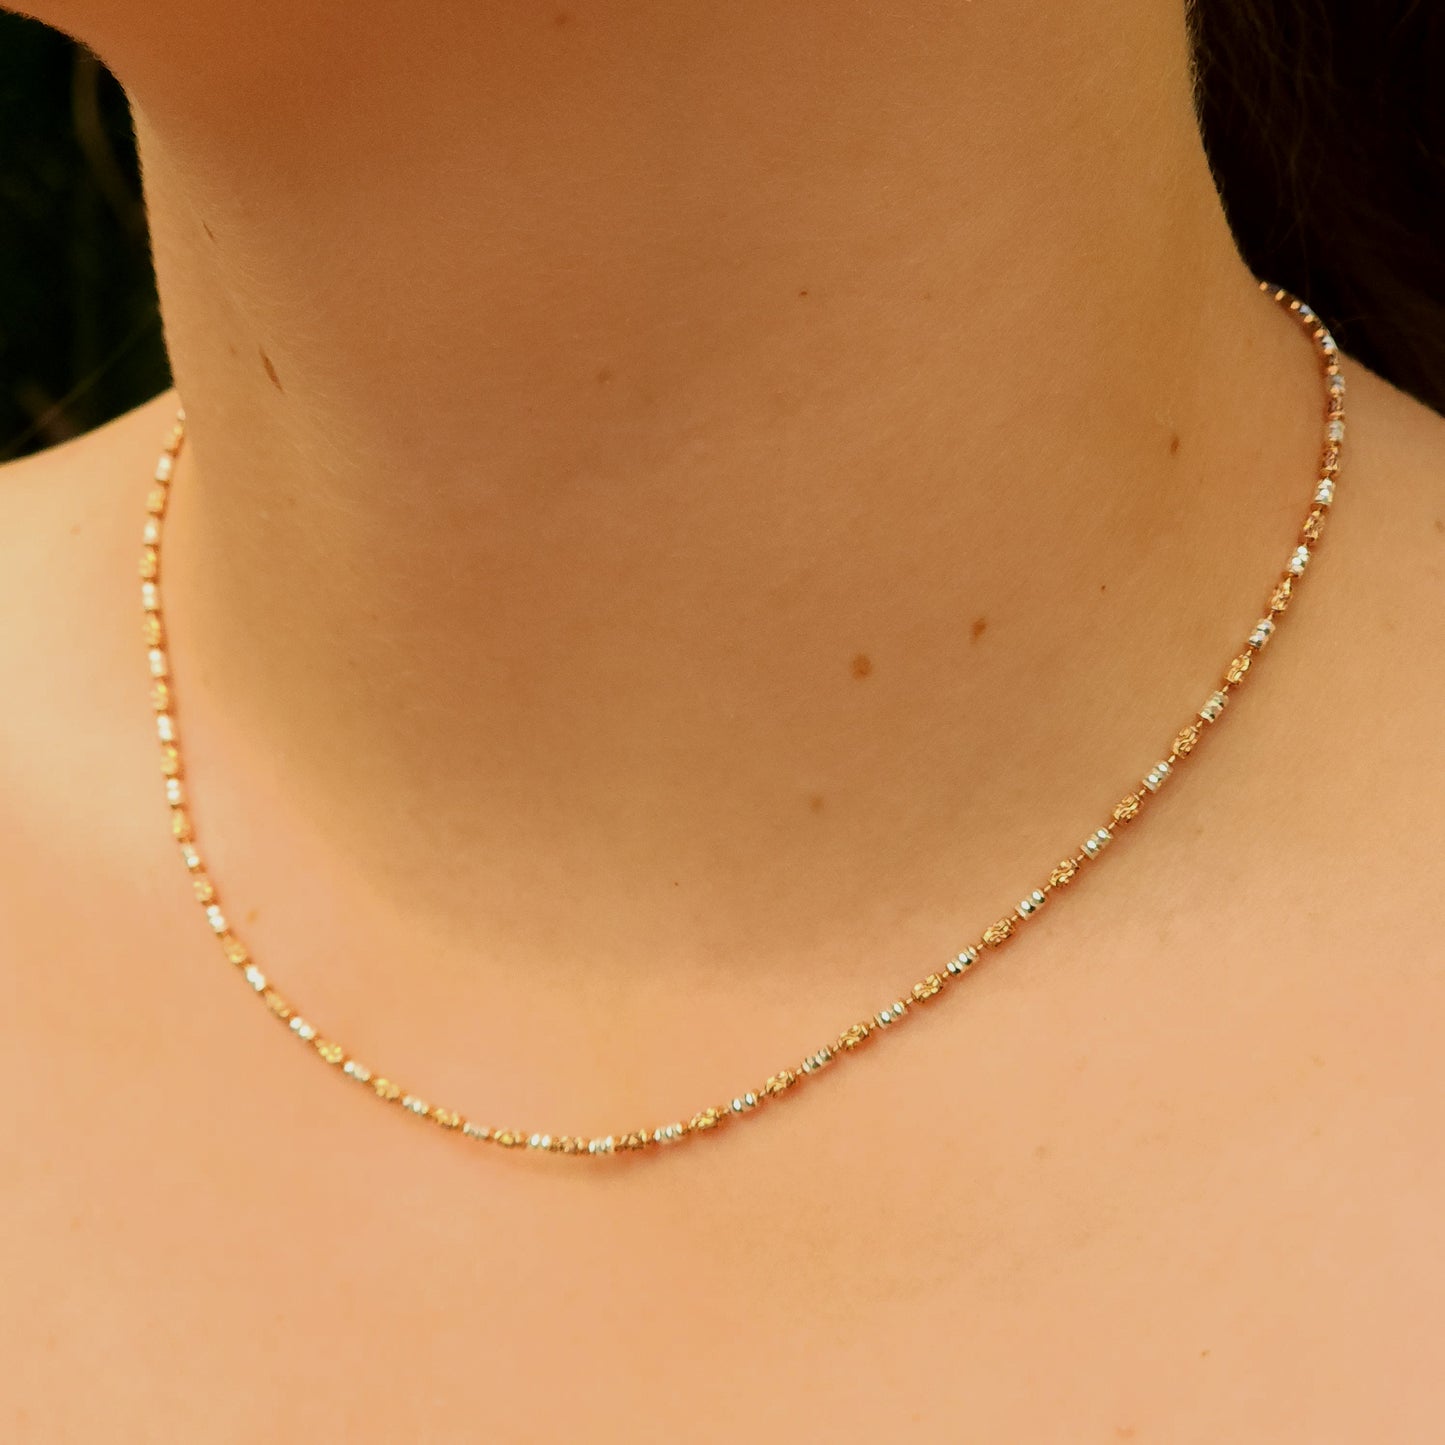 Silver Chain Long Beads Rose Gold & Rhodium